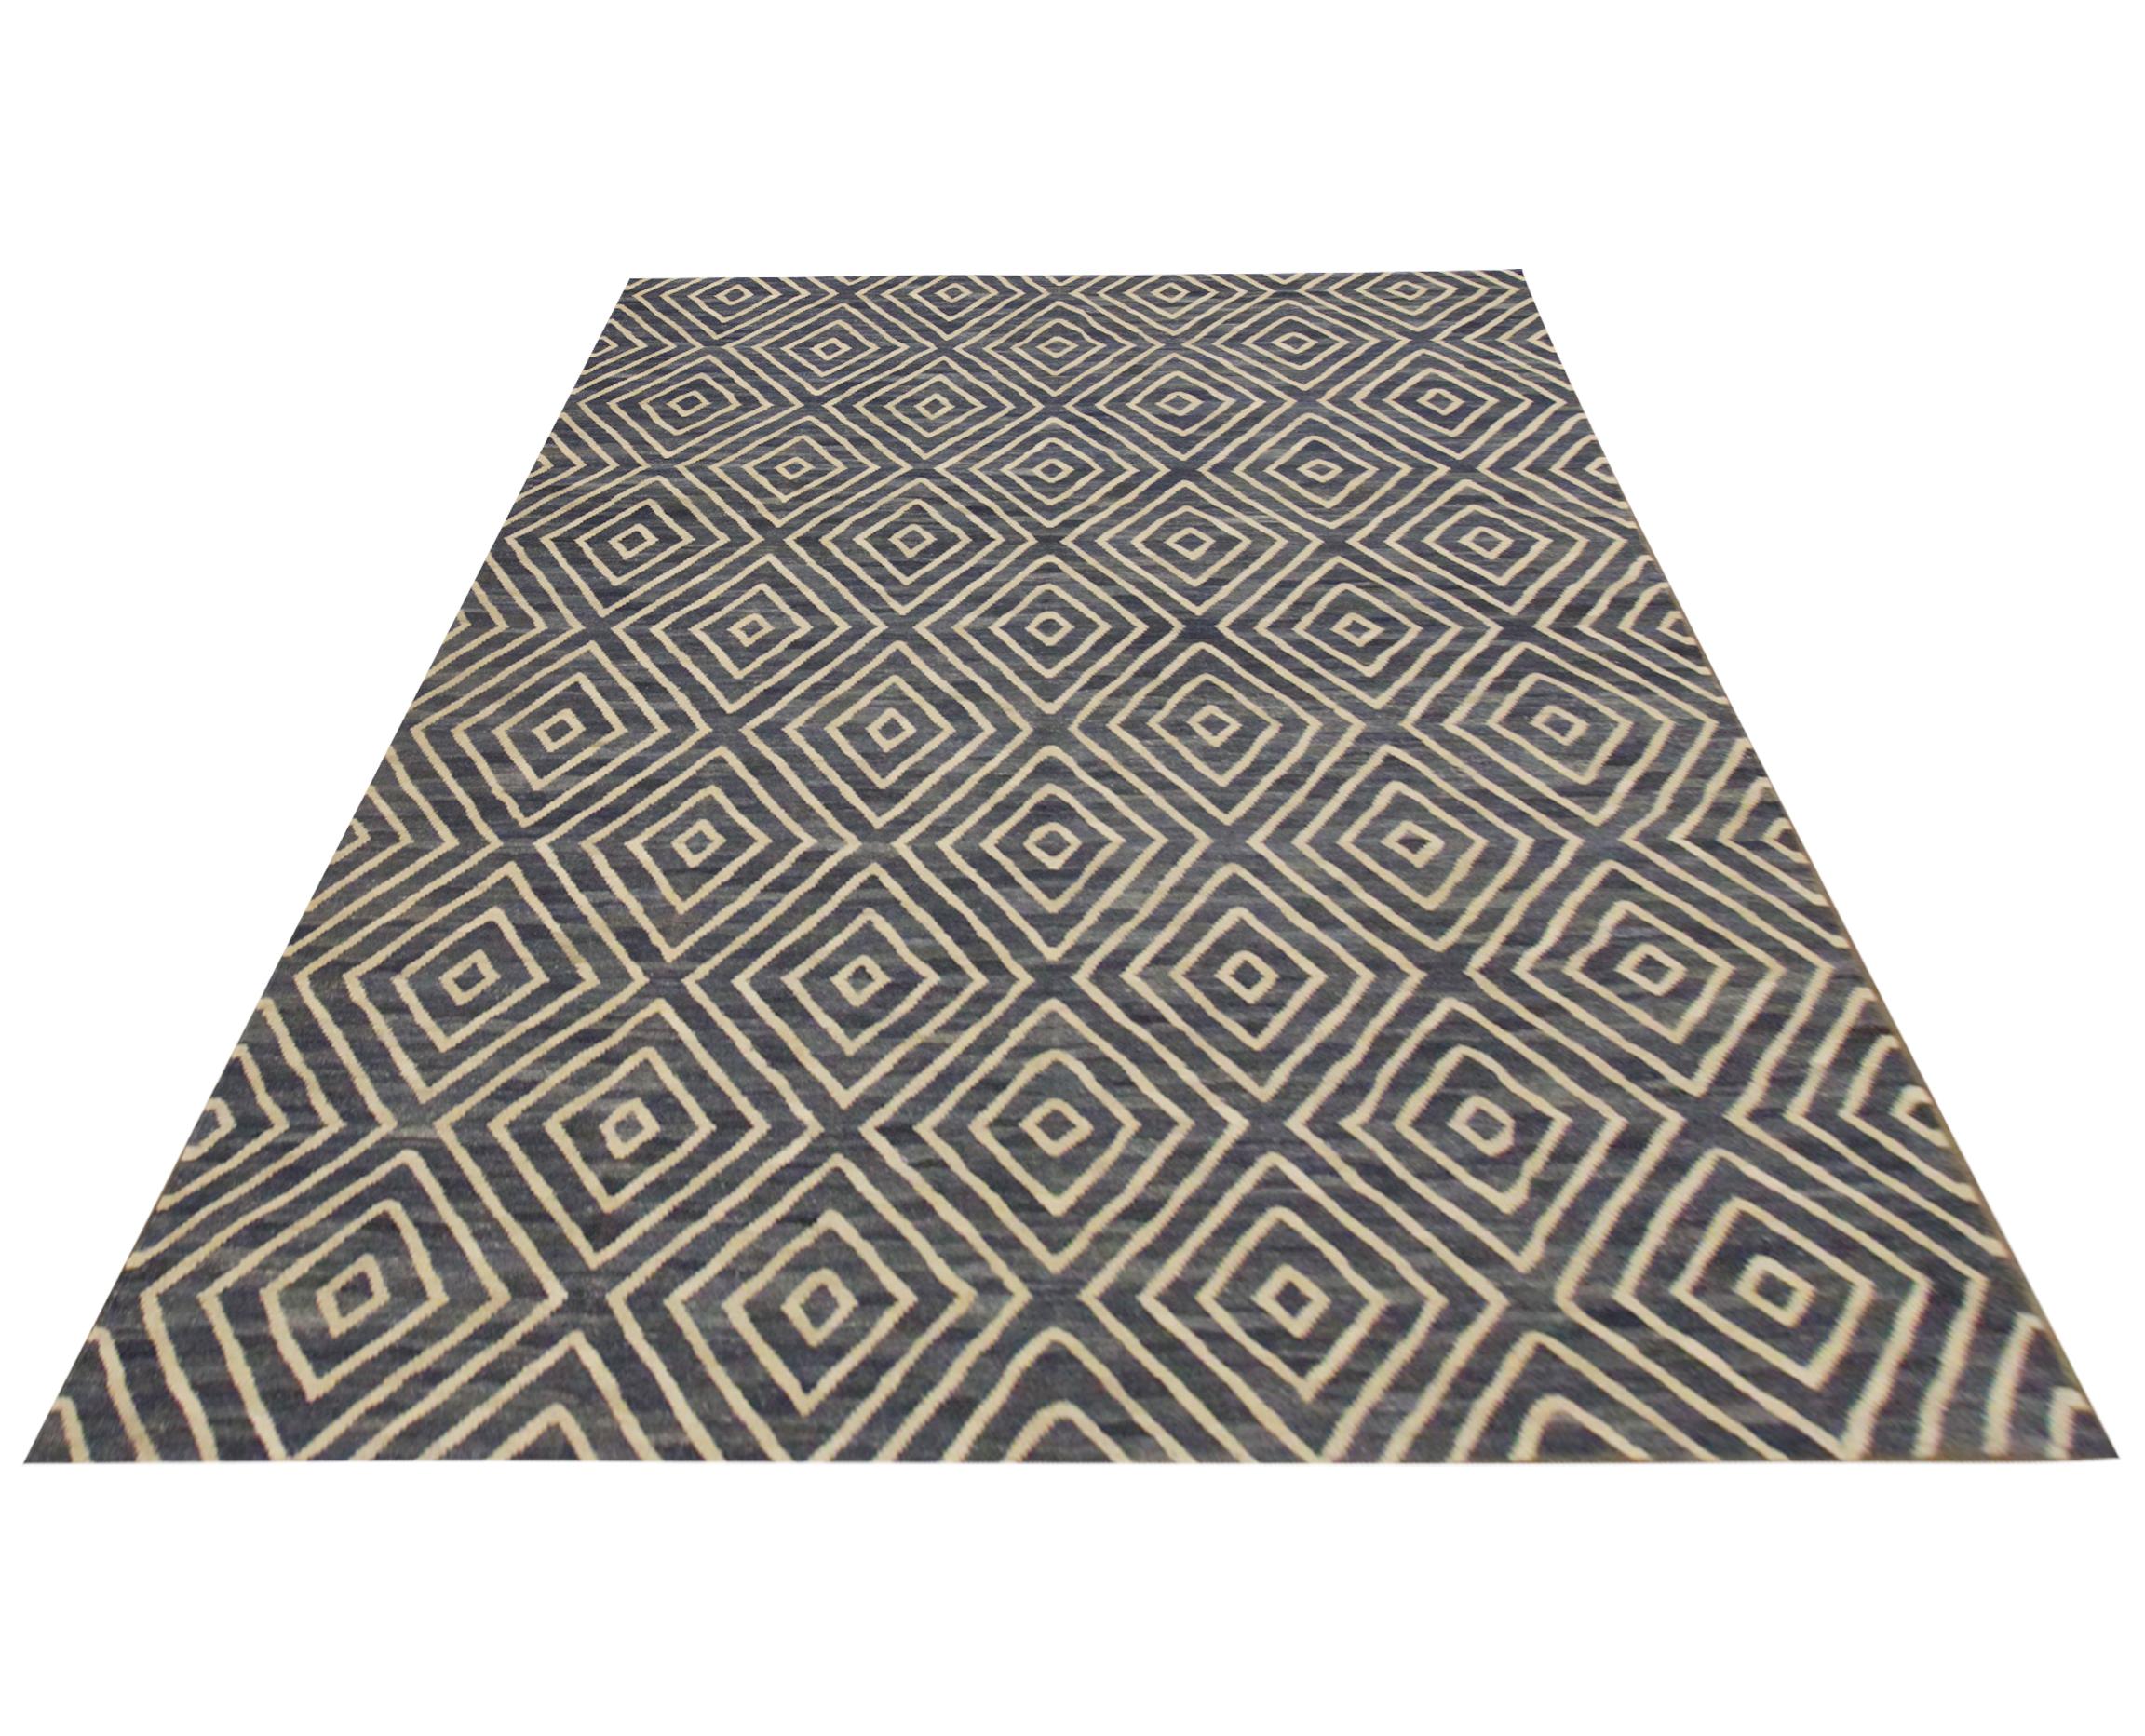 This bold wool area rug is a handwoven Afghan Kilim. The design features an all-over geometric diamond pattern woven in navy blue and cream. The simple, contrasting colour palette and bold geometric design make this piece the perfect accent rug.